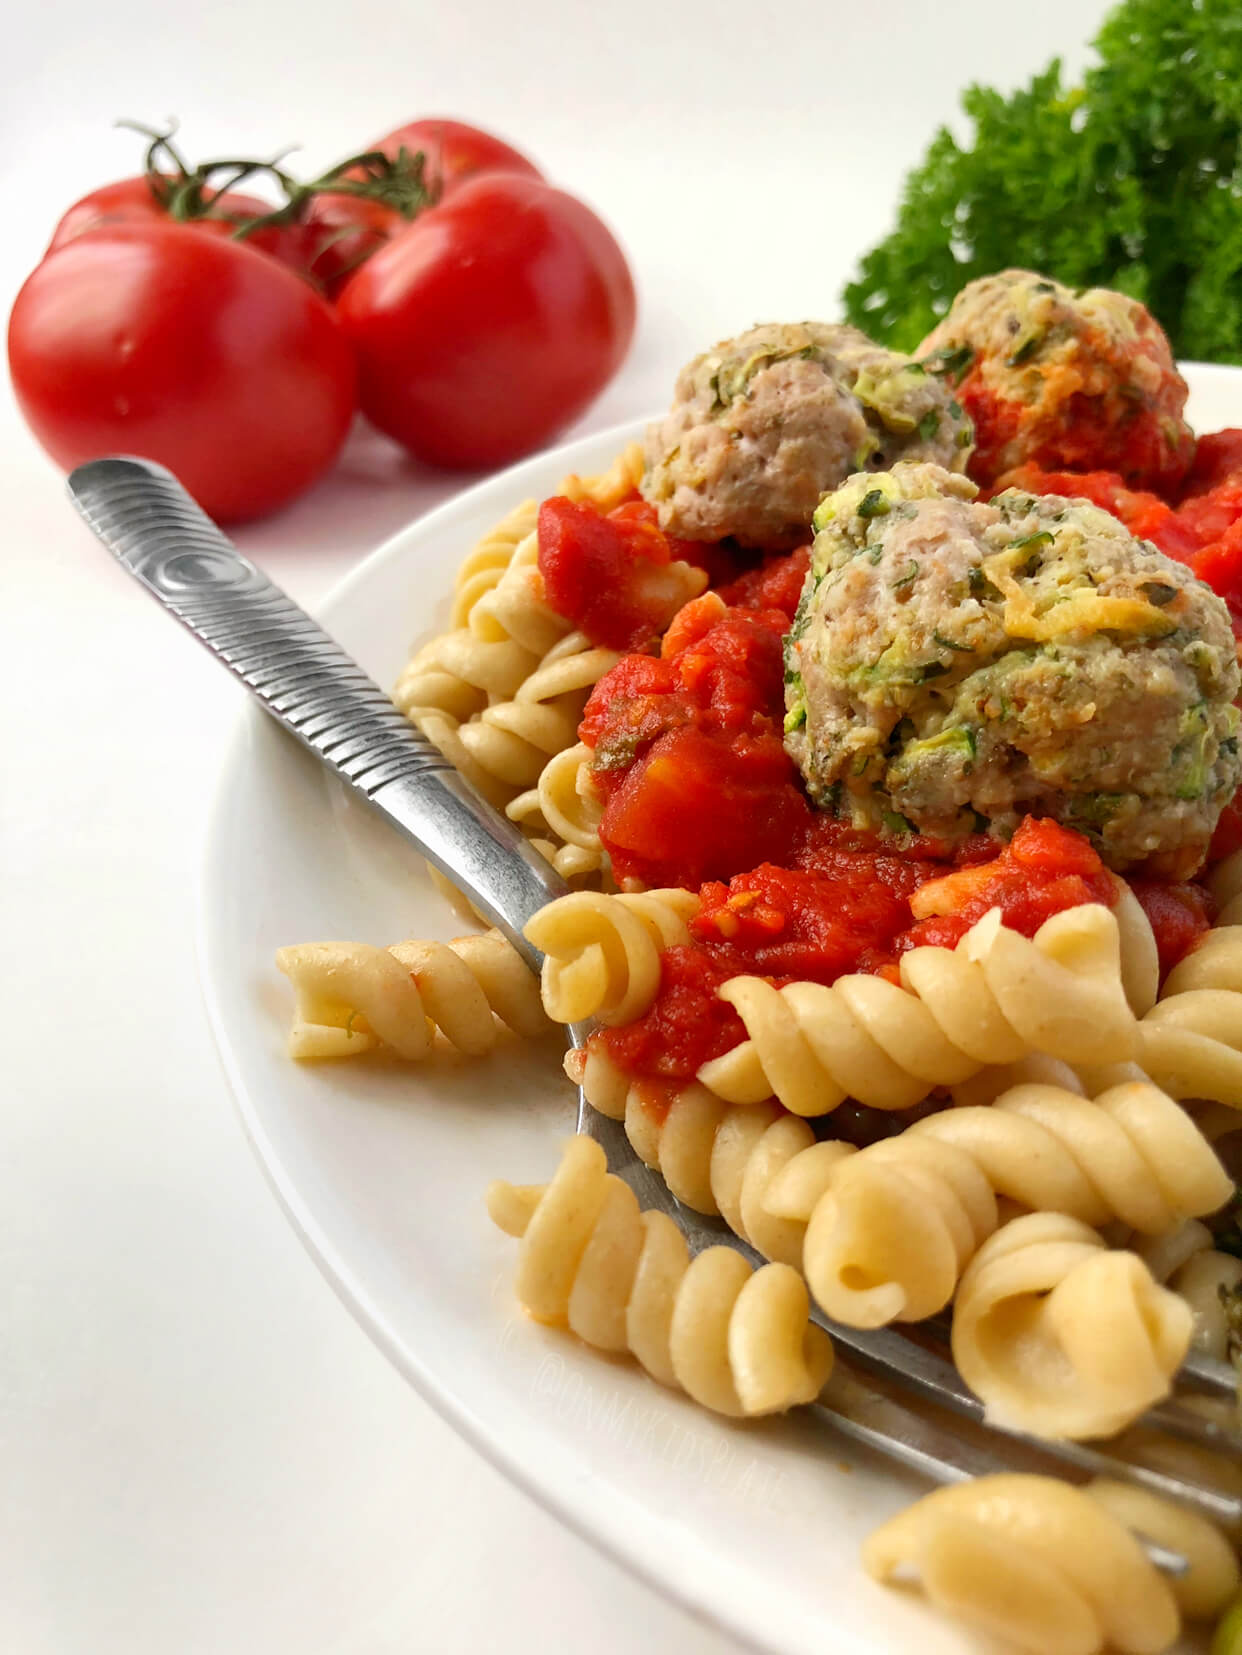 A plate of meatballs, pasta and tomato sauce with tomatoes and parsely in the background